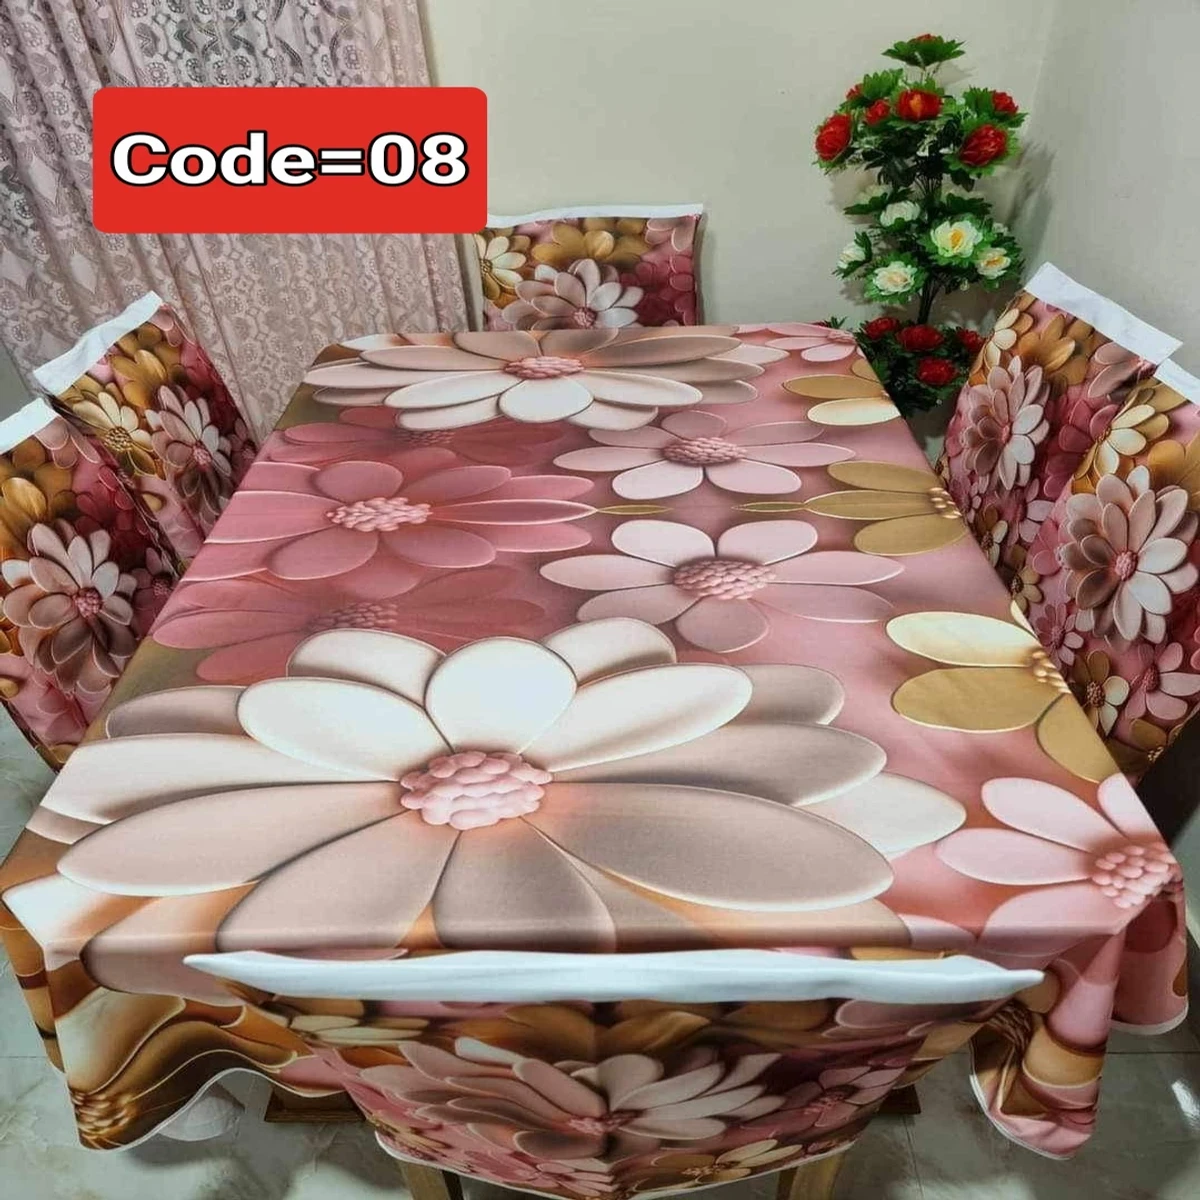 Dining table and chair cover code = 08